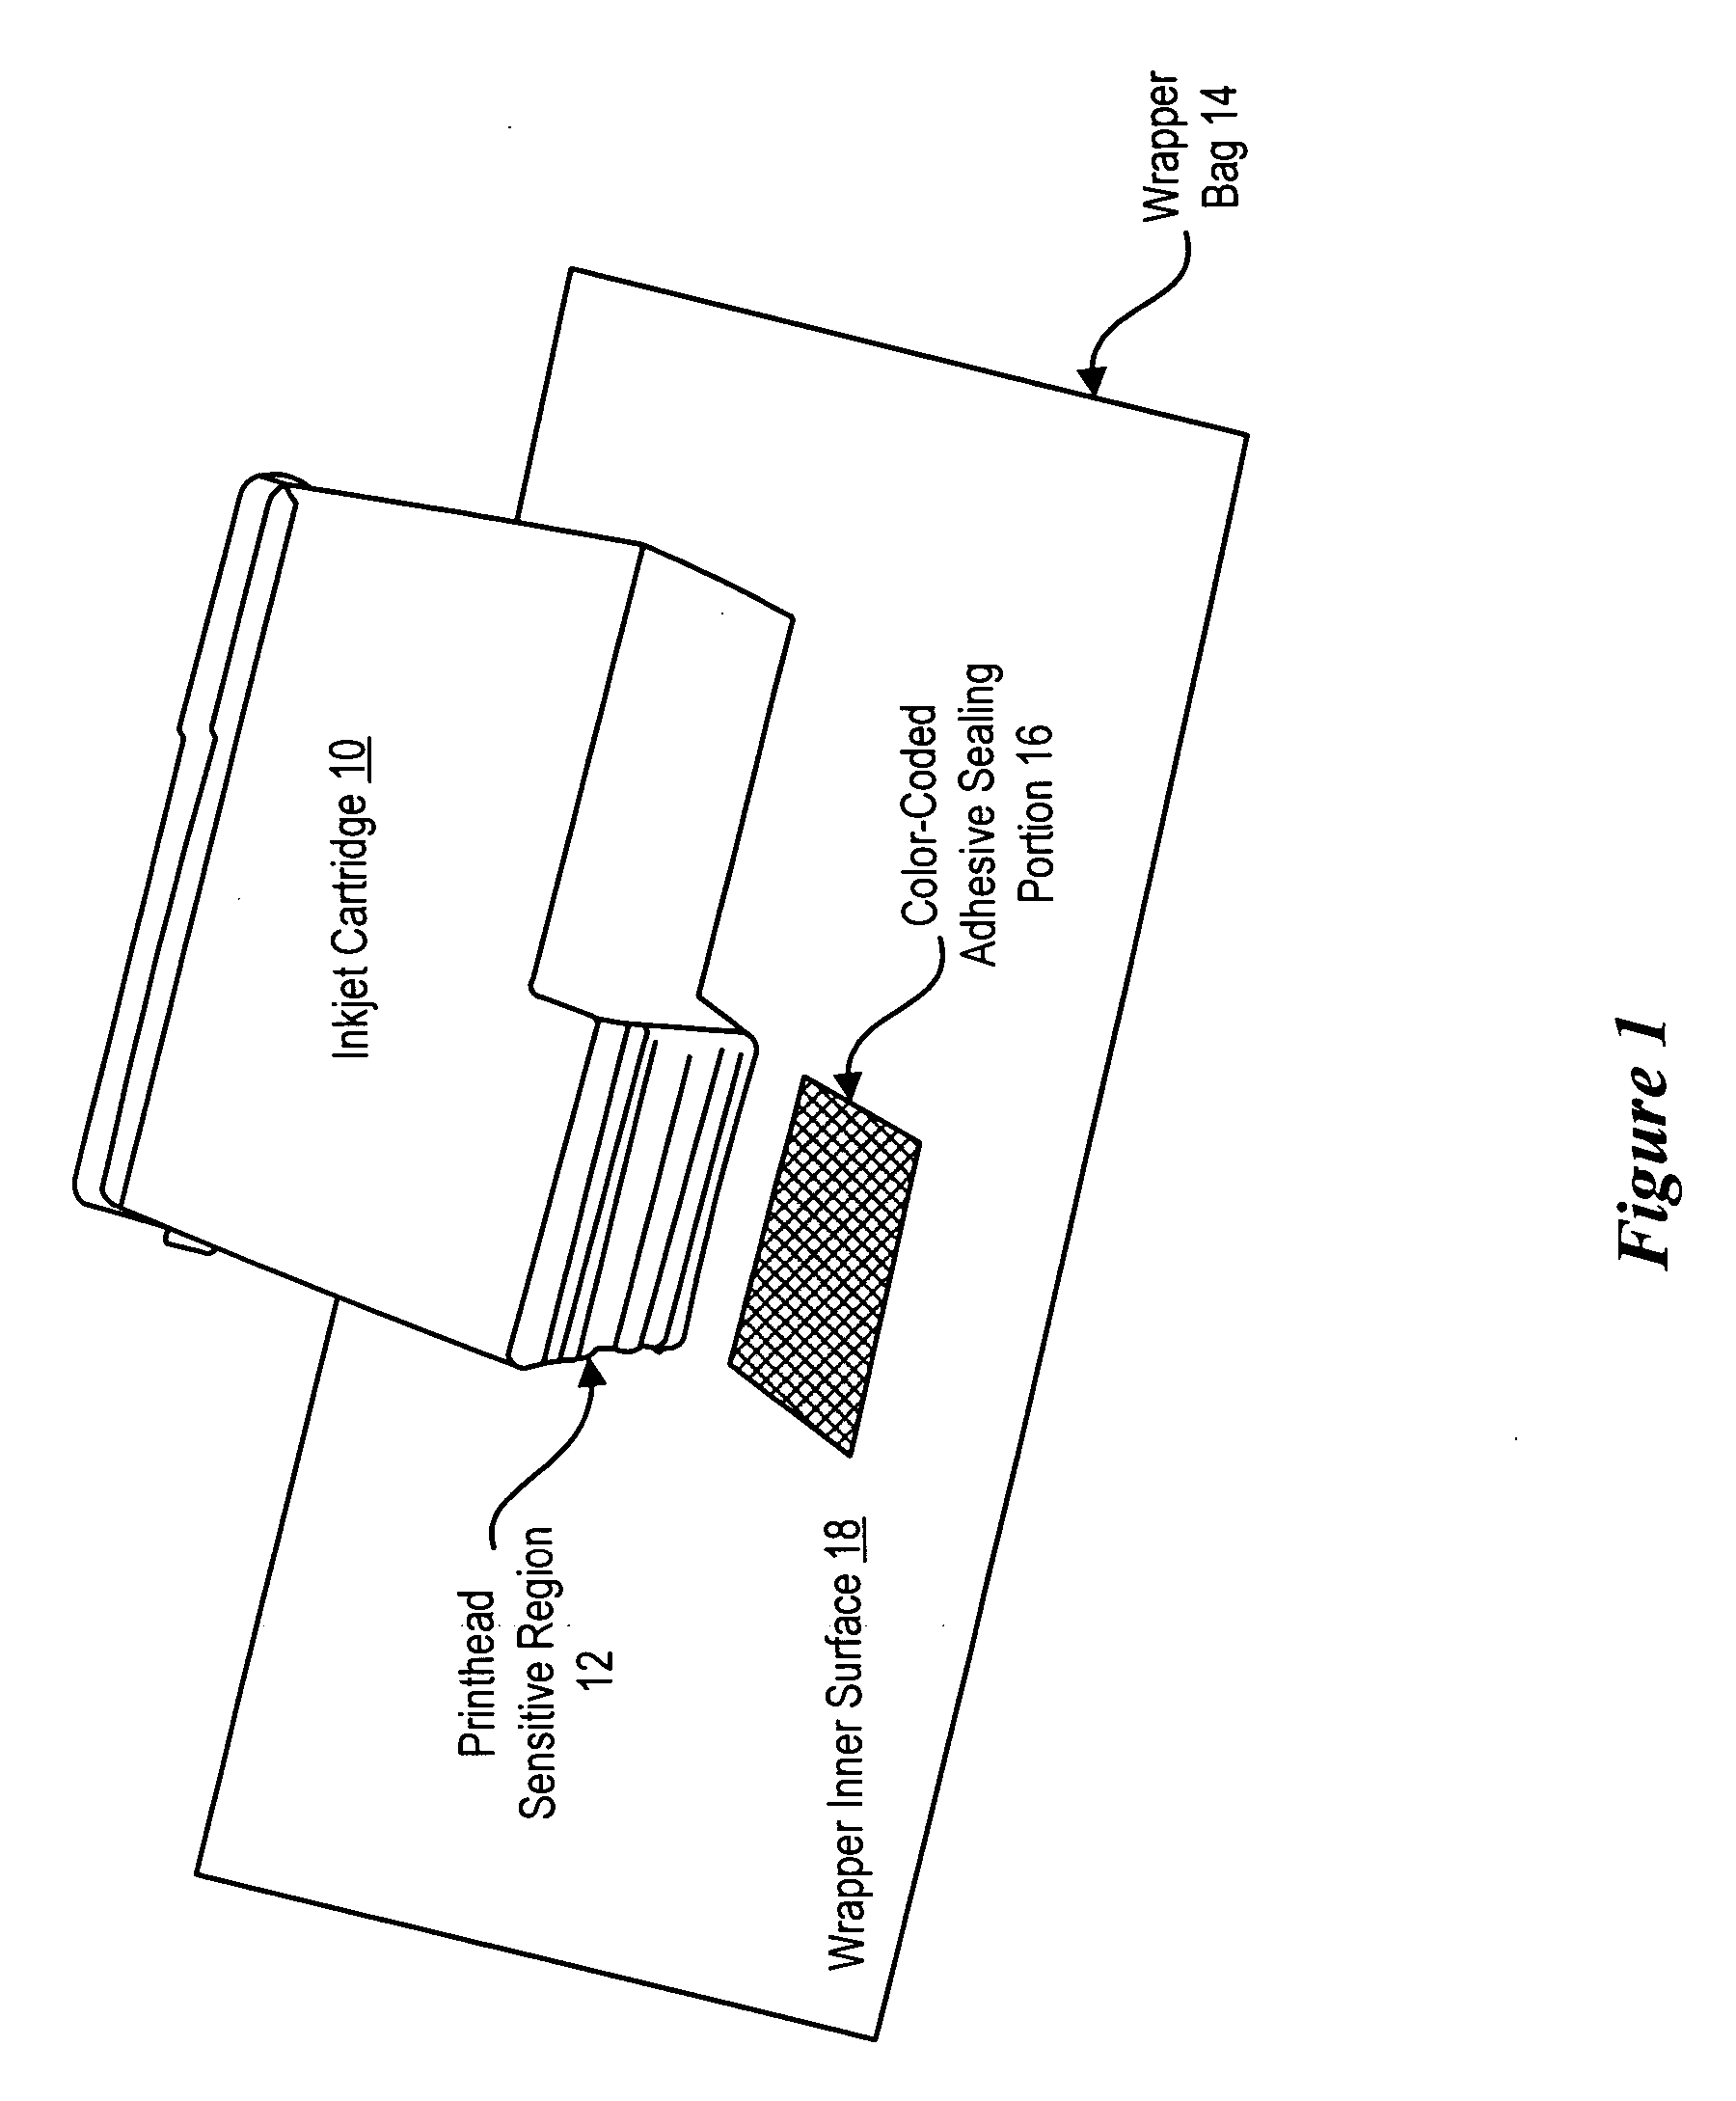 System and method for integrated tape seal package